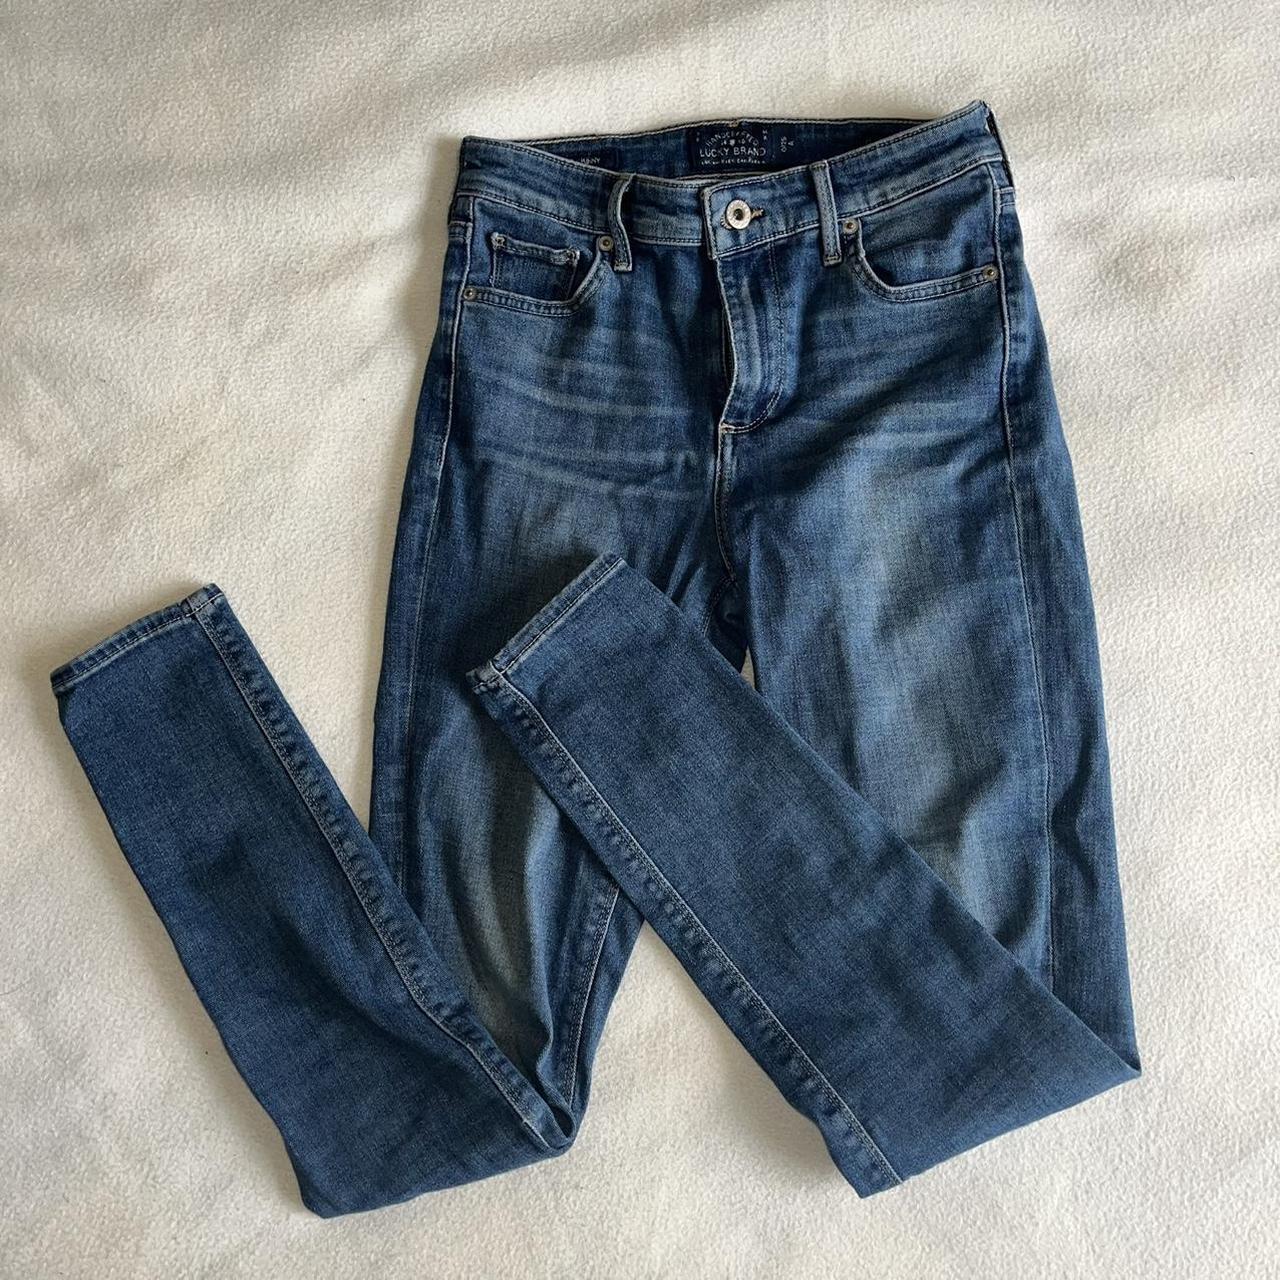 LUCKY BRAND skinny jeans MADE IN THE USA 🇺🇸 - Depop